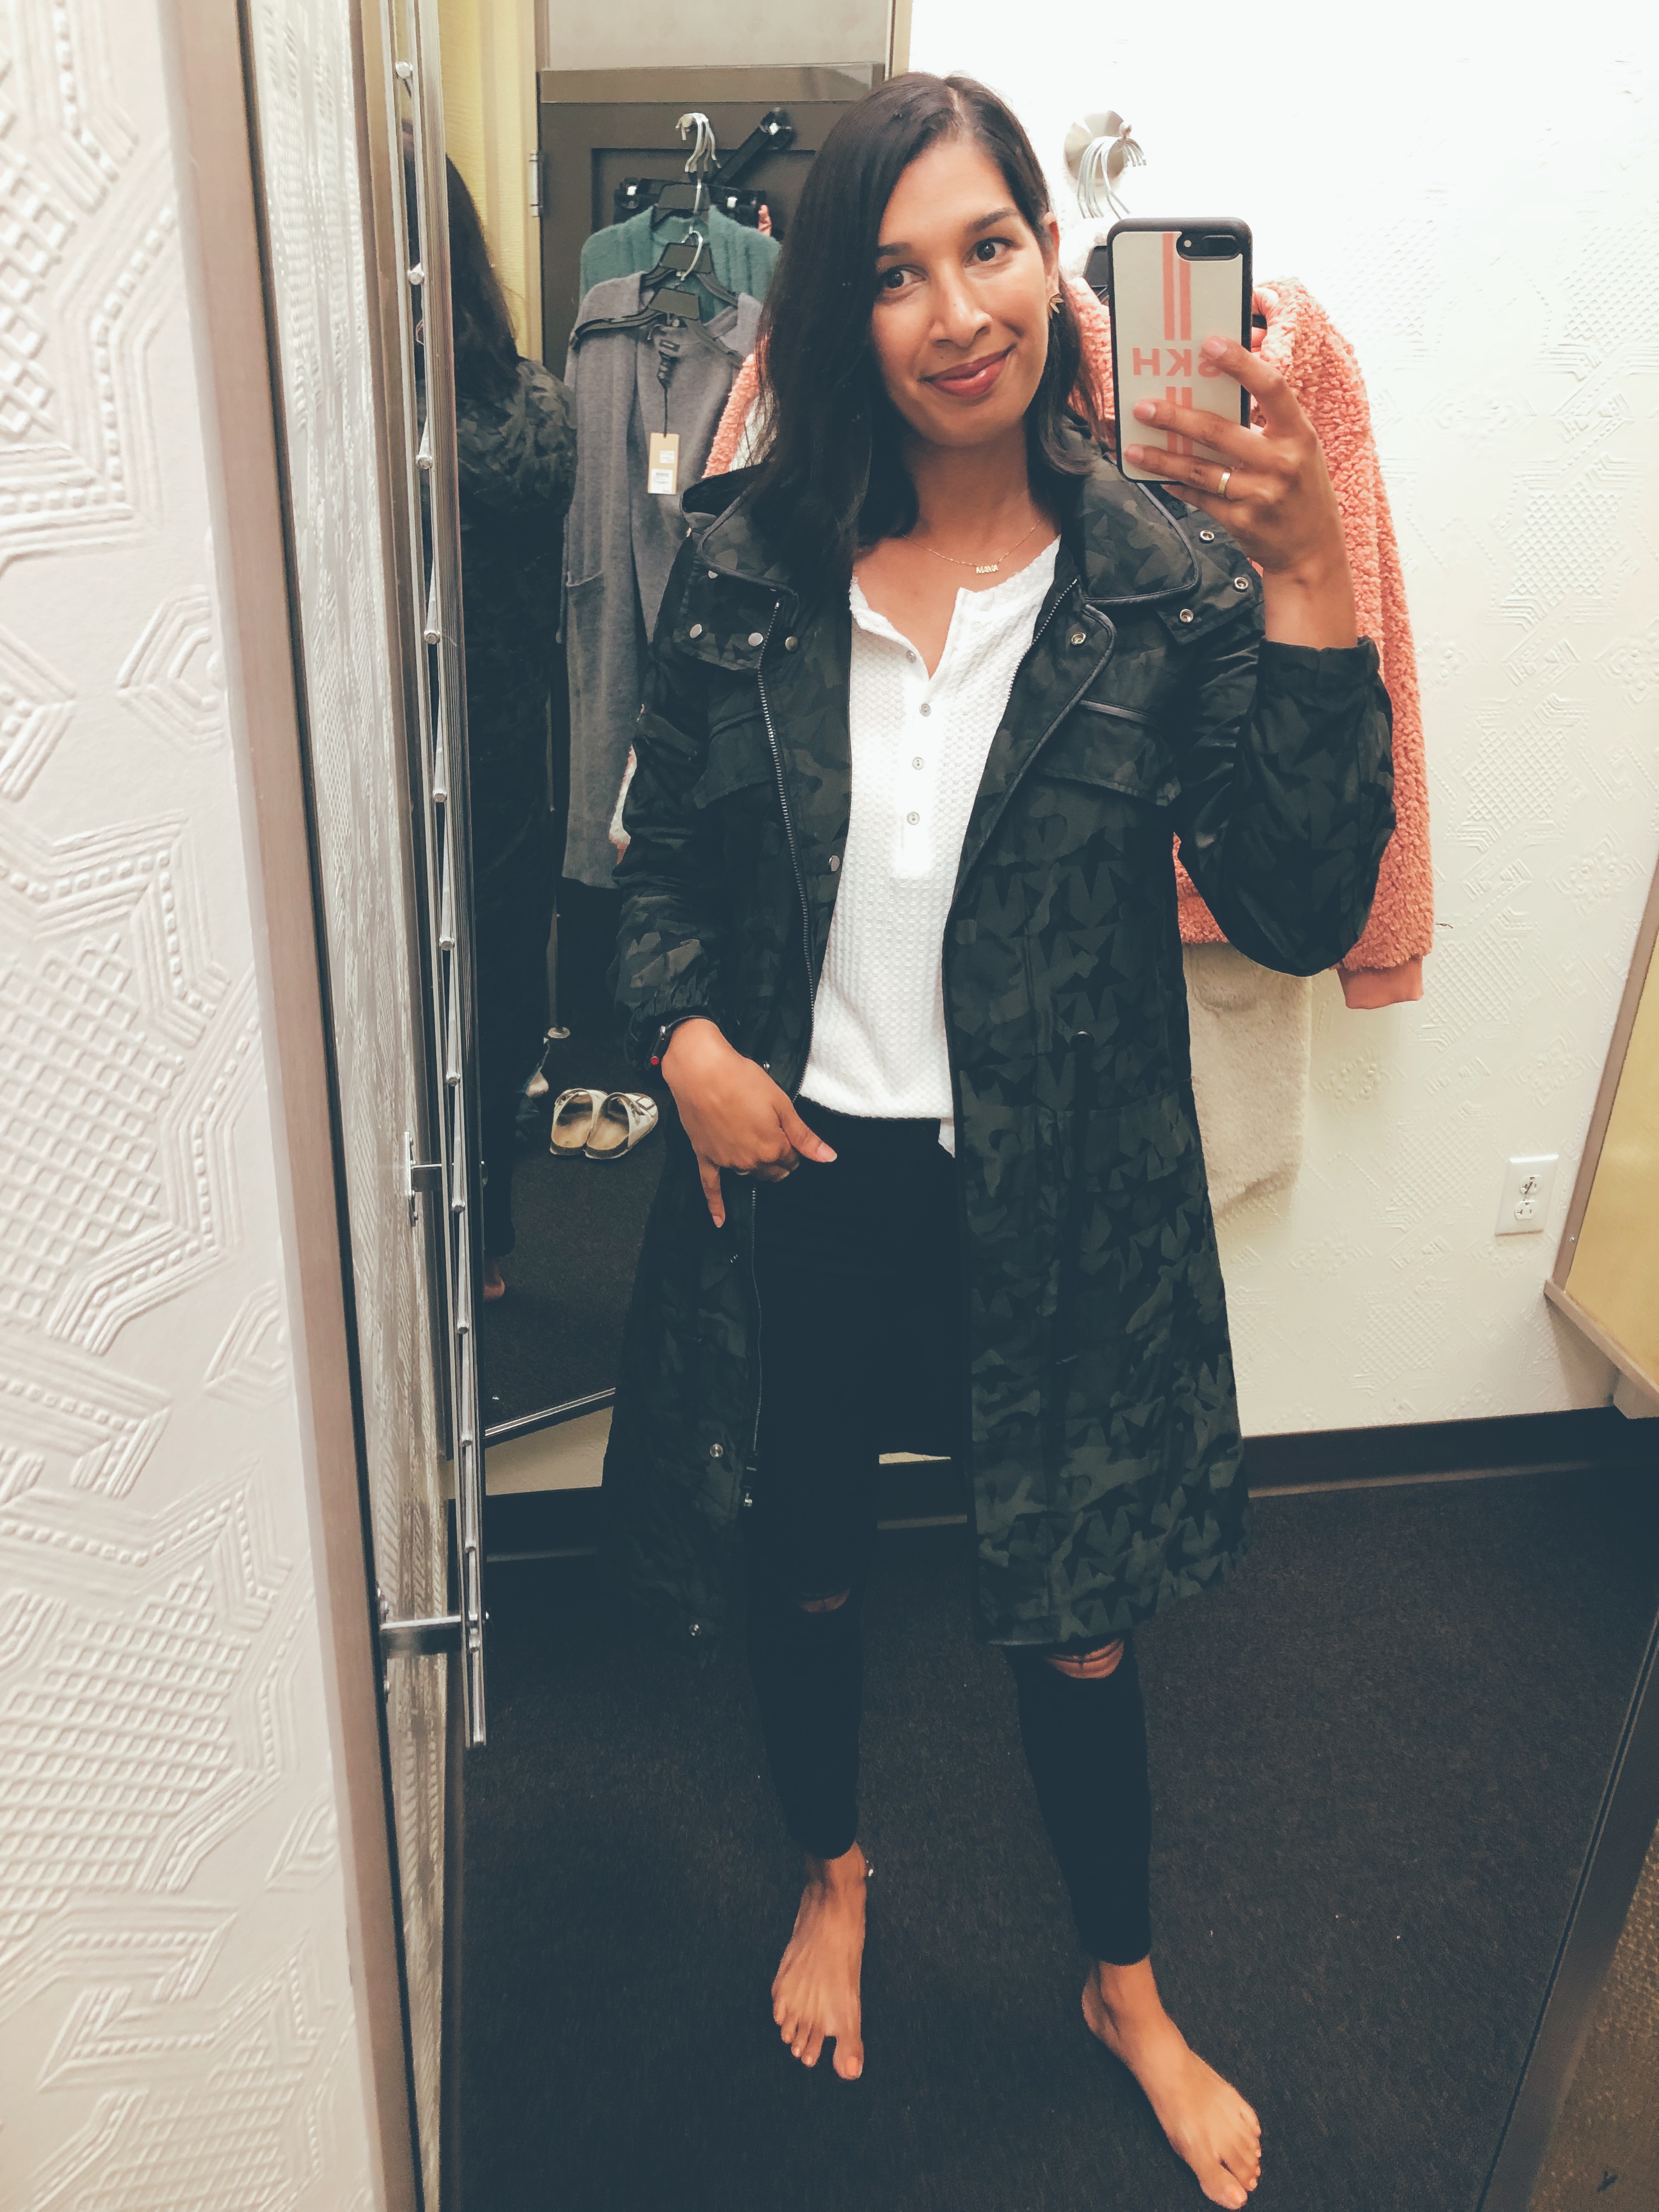 nordstrom anniversary try on